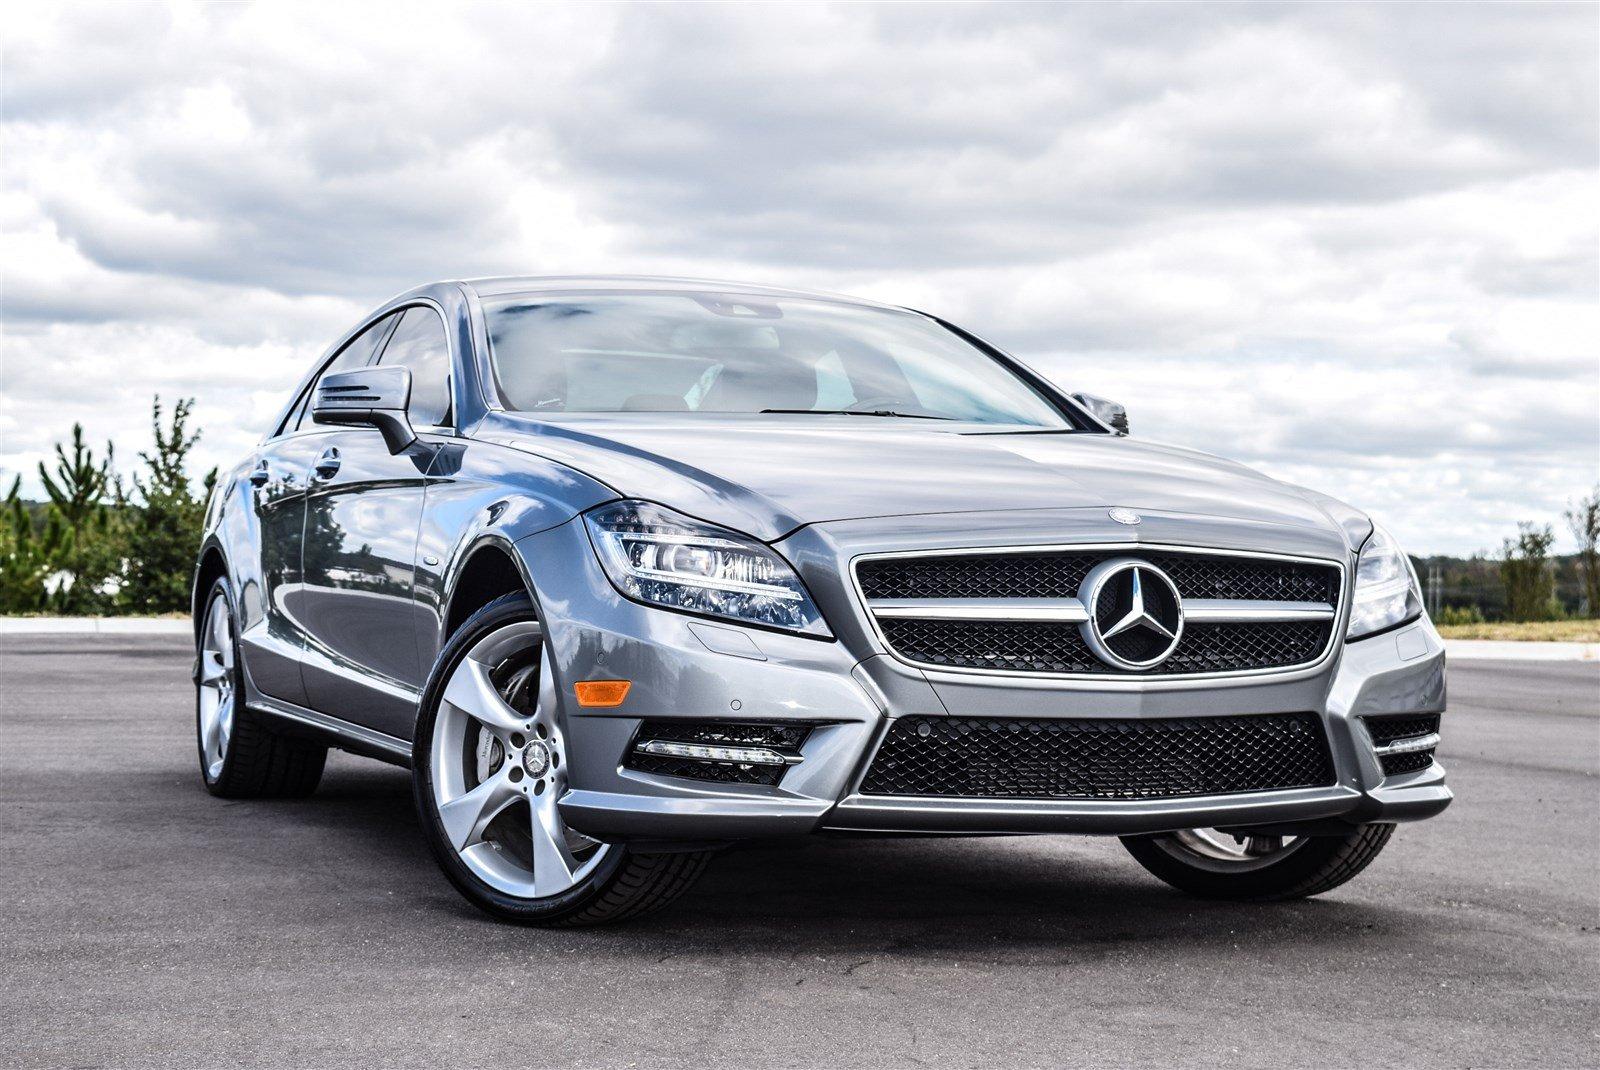 Used 2012 Mercedes-Benz CLS-Class CLS550 for sale Sold at Gravity Autos Marietta in Marietta GA 30060 21